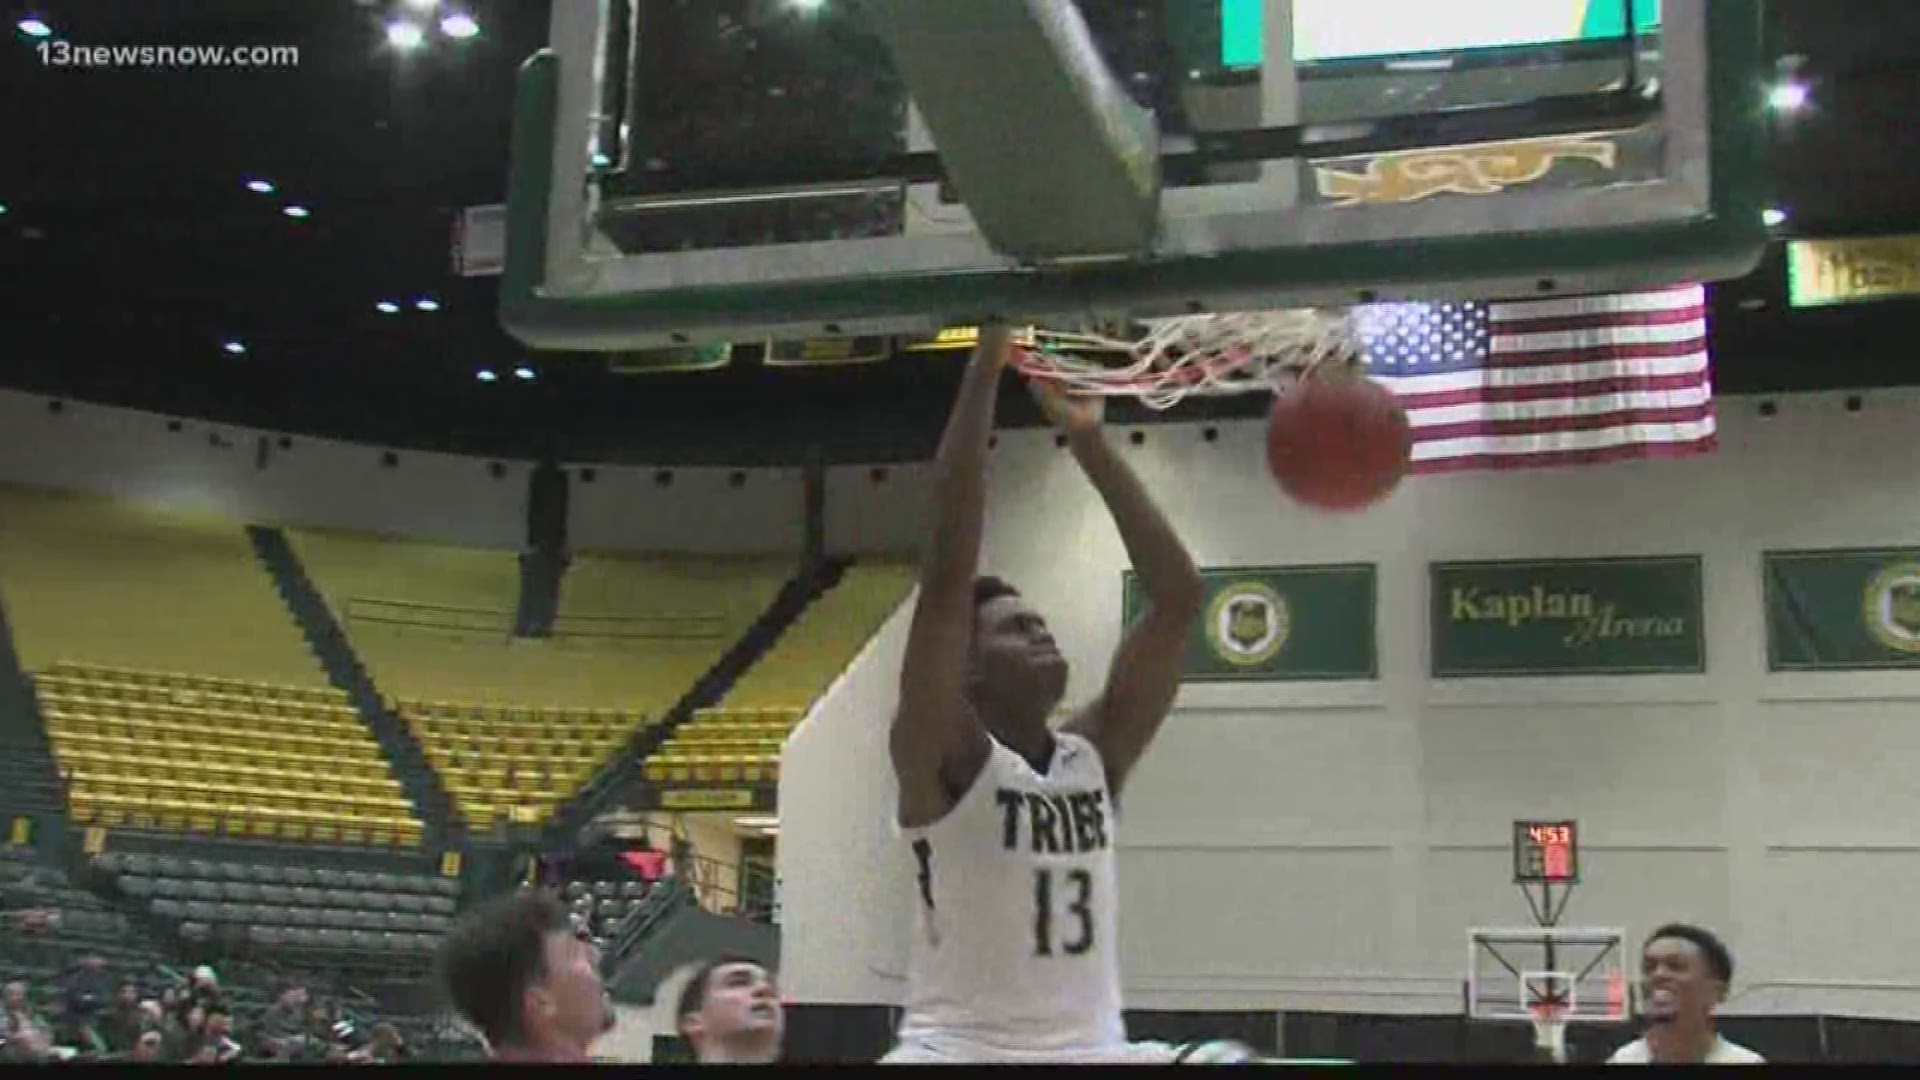 Nathan Knight had a team high 21 points that included the game winner with 1.7 seconds left as William & Mary edged St. Joseph's 87-85. It snapped their 4 game losing streak.